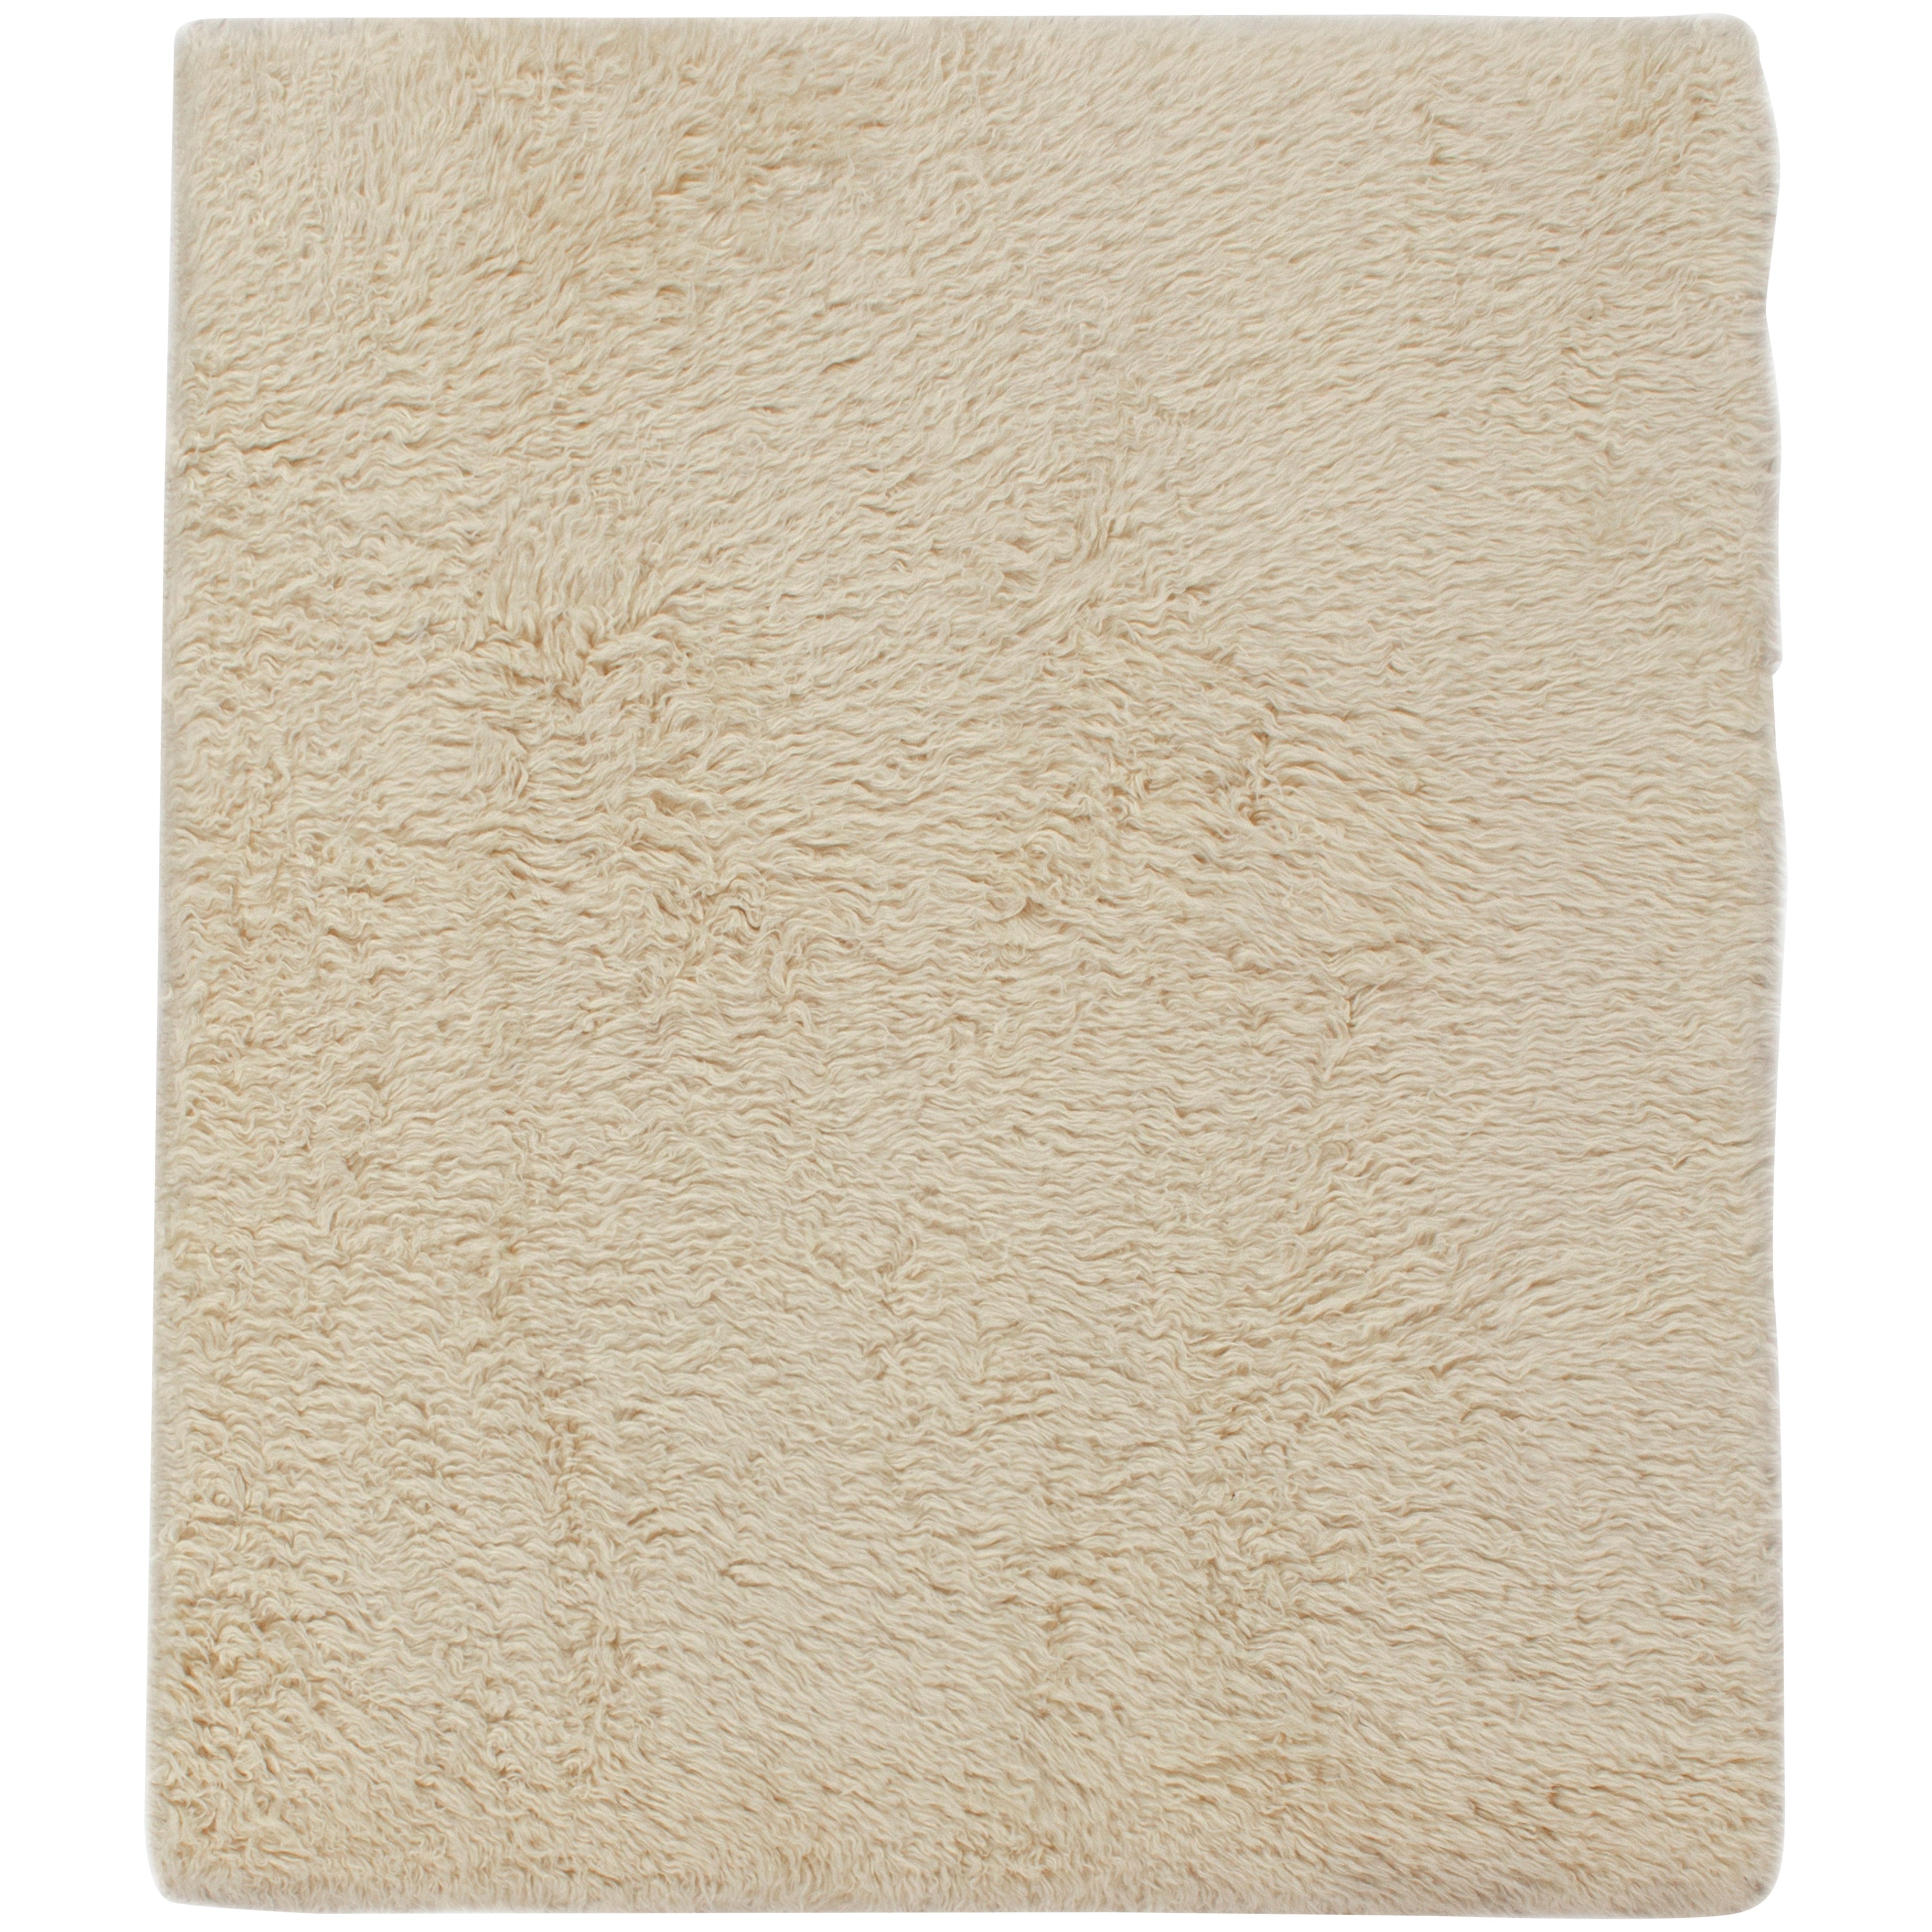 Rug & Kilim’s Moroccan Style Shag Rug in Creamy High-Pile For Sale